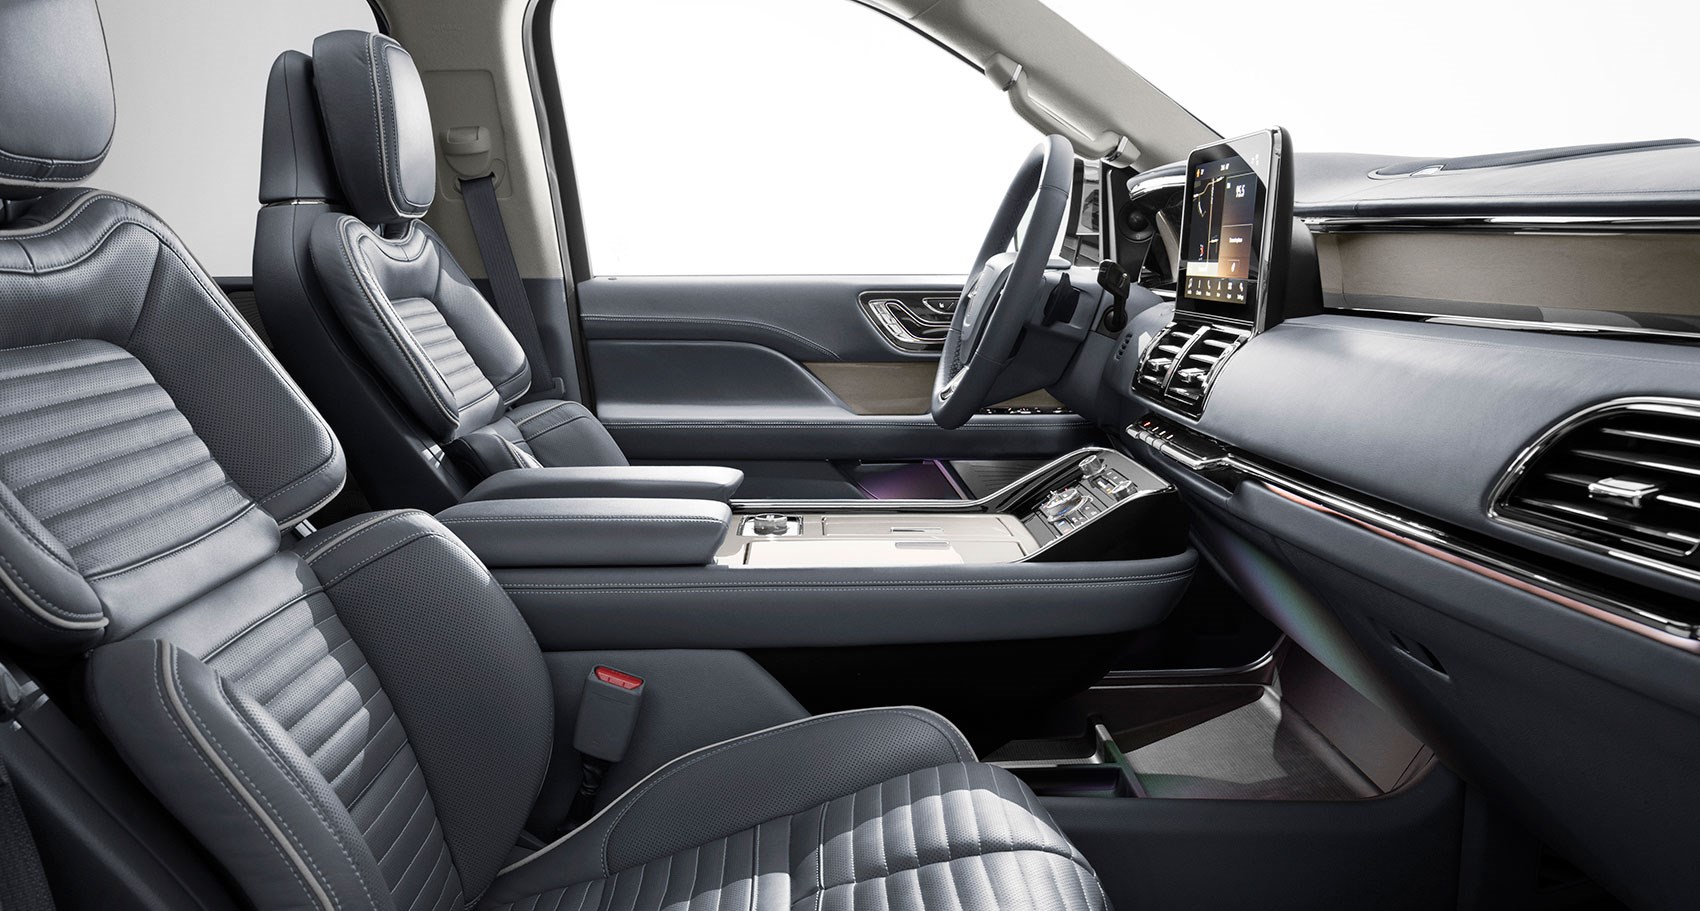 New Lincoln Navigator Maxing Out The Luxury Suv Sector